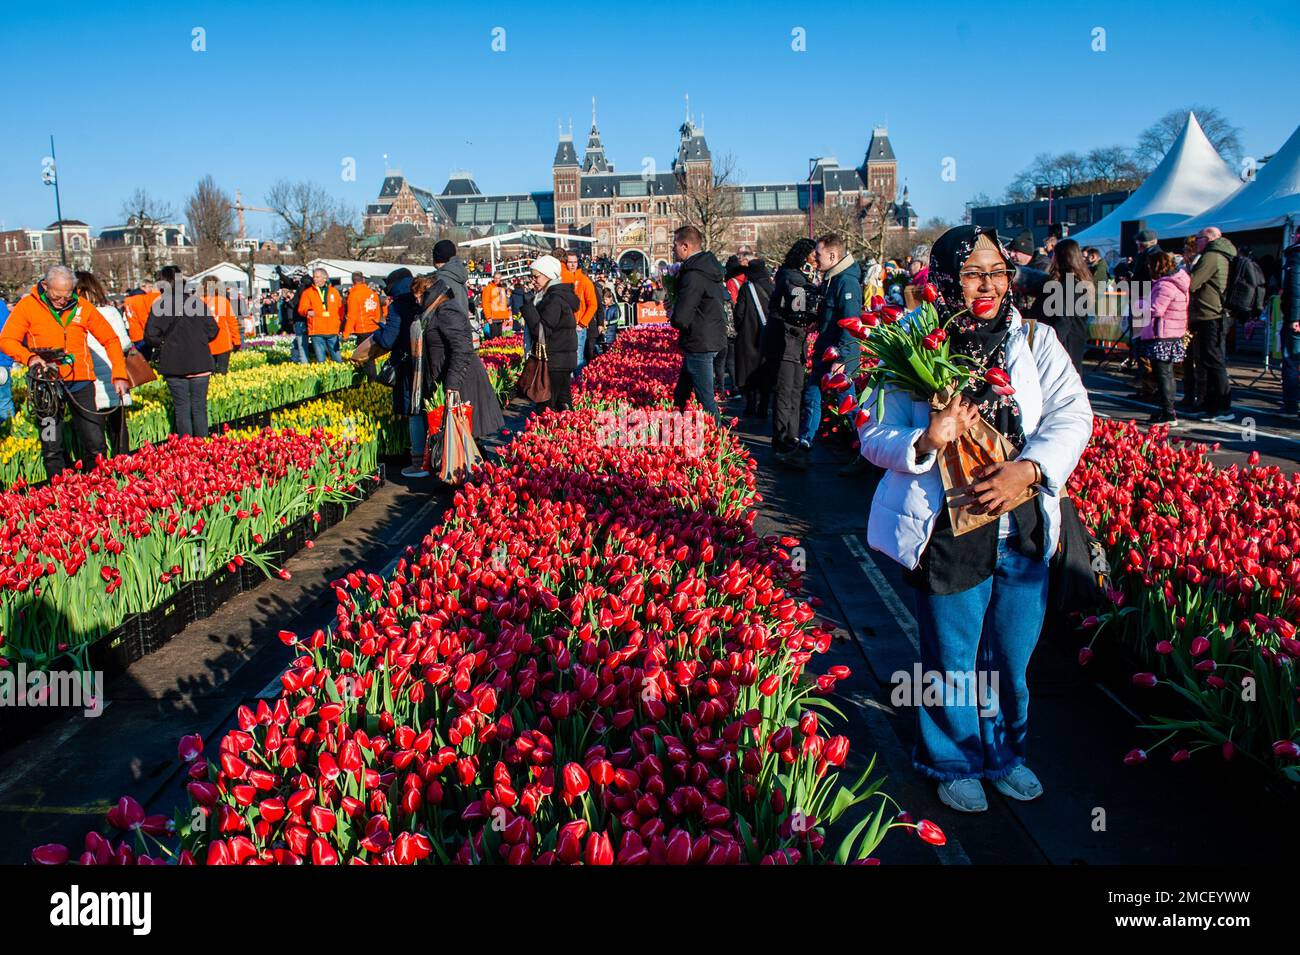 A woman seen posing with her tulips. Each year on the 3rd Saturday of January, the National Tulip Day is celebrated in Amsterdam. Dutch tulip growers built a huge picking garden with more than 200,000 colorful tulips at the Museumplein in Amsterdam. Visitors are allowed to pick tulips for free. The event was opened by Olympic skating champion, Irene Schouten. Prior to the opening, she christened a new tulip: Tulipa 'Dutch Pearl' as a reference to the world - famous painting 'The girl with a pearl earring' by Johannes Vermeer. (Photo by Ana Fernandez/SOPA Images/Sipa USA) Stock Photo